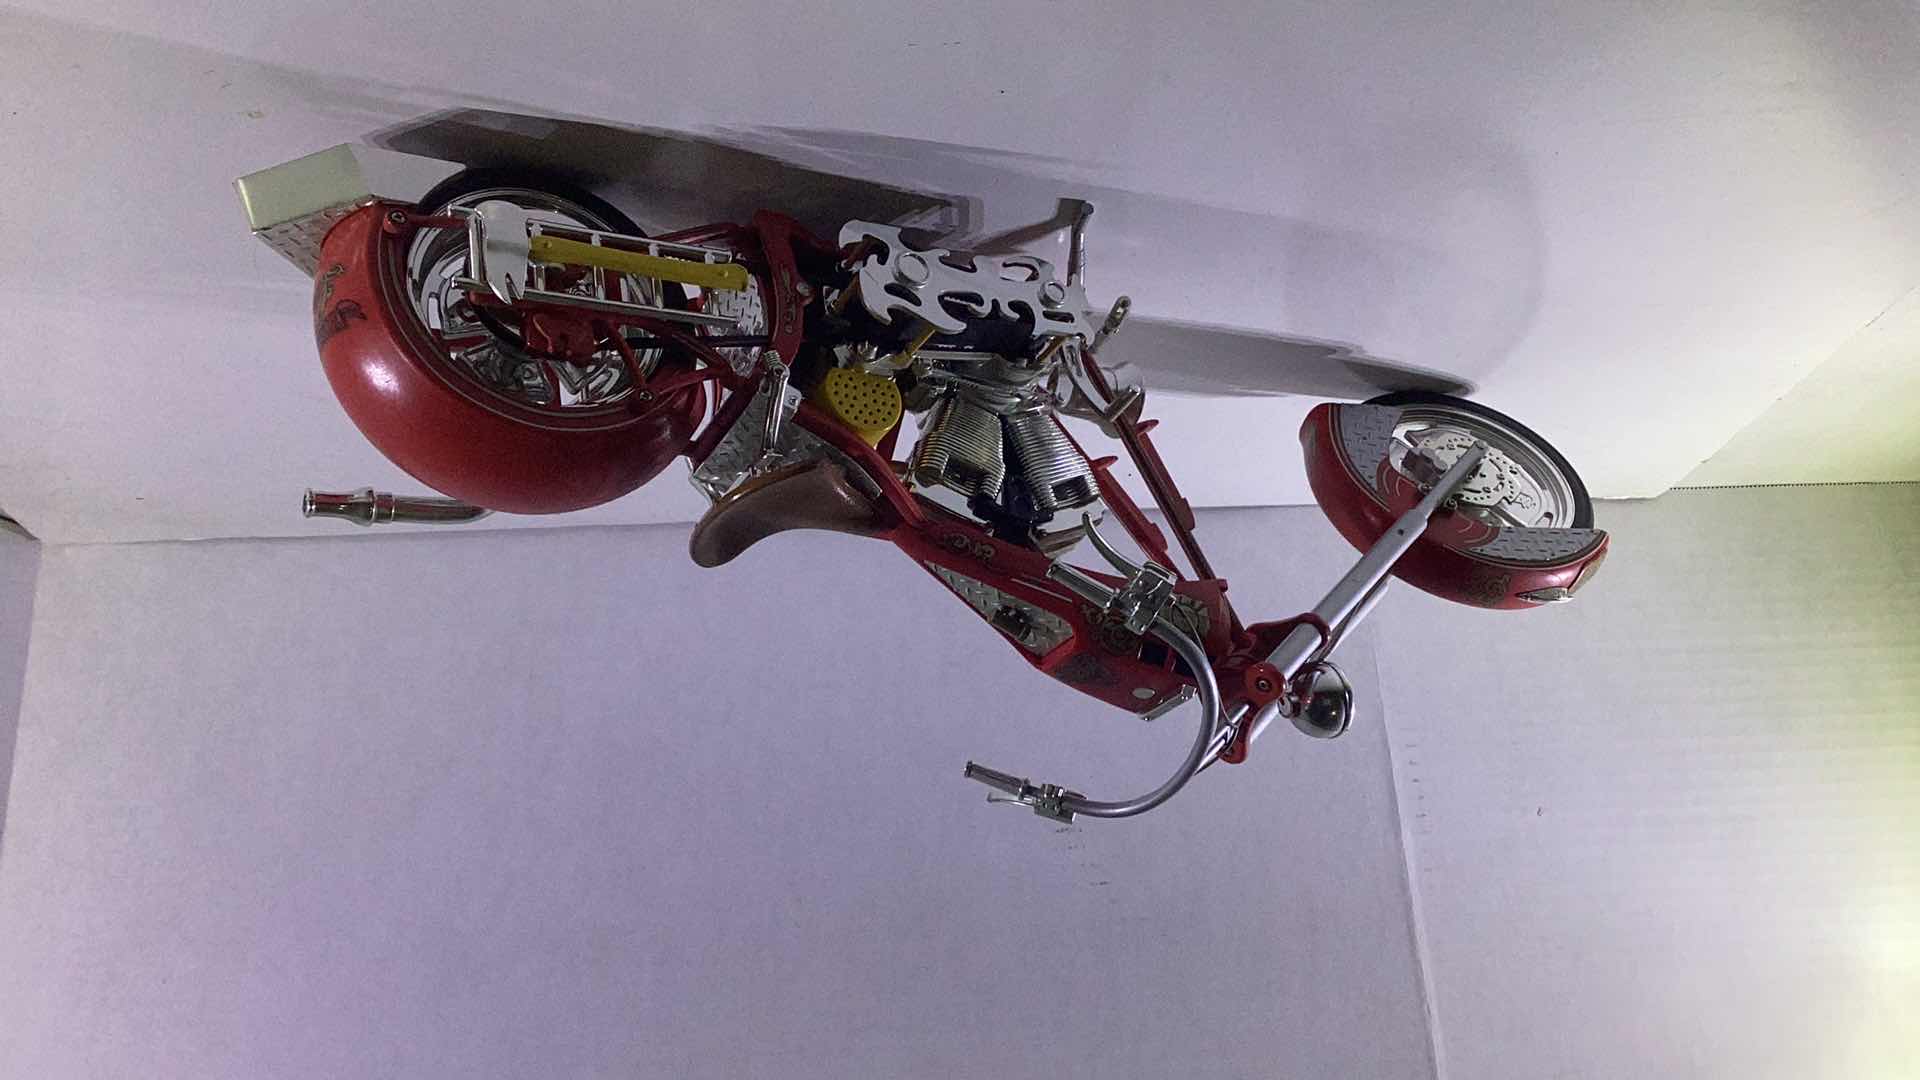 Photo 1 of LARGE MOTORCYCLE MODEL 19” LONG WITH WORKING SIREN